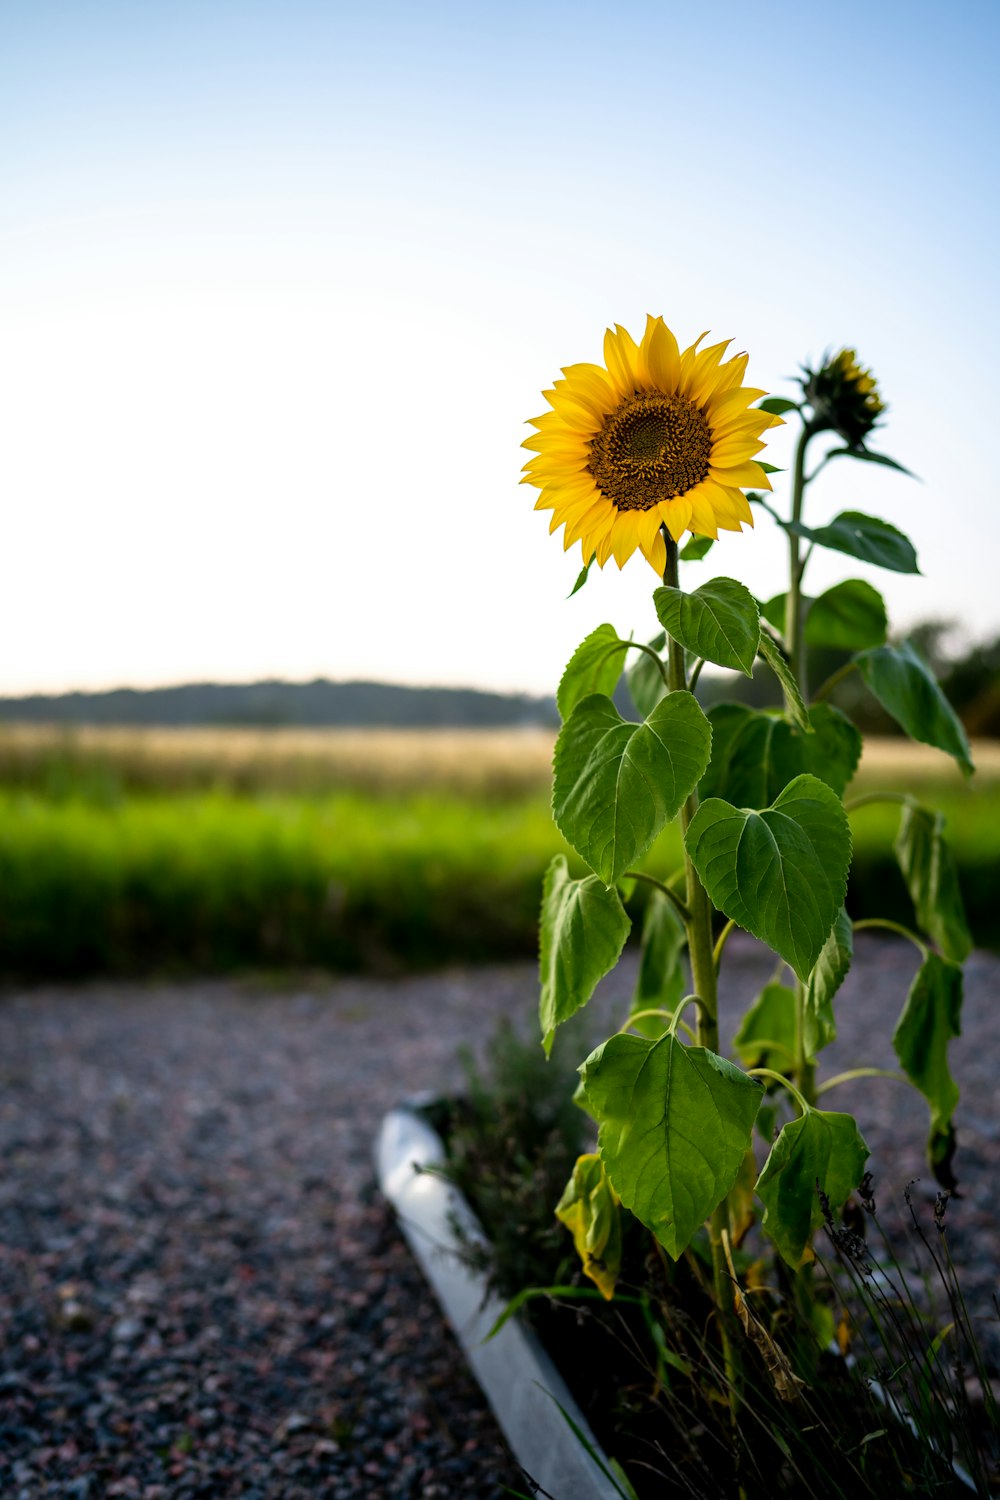 a sunflower is growing in a planter on a gravel road